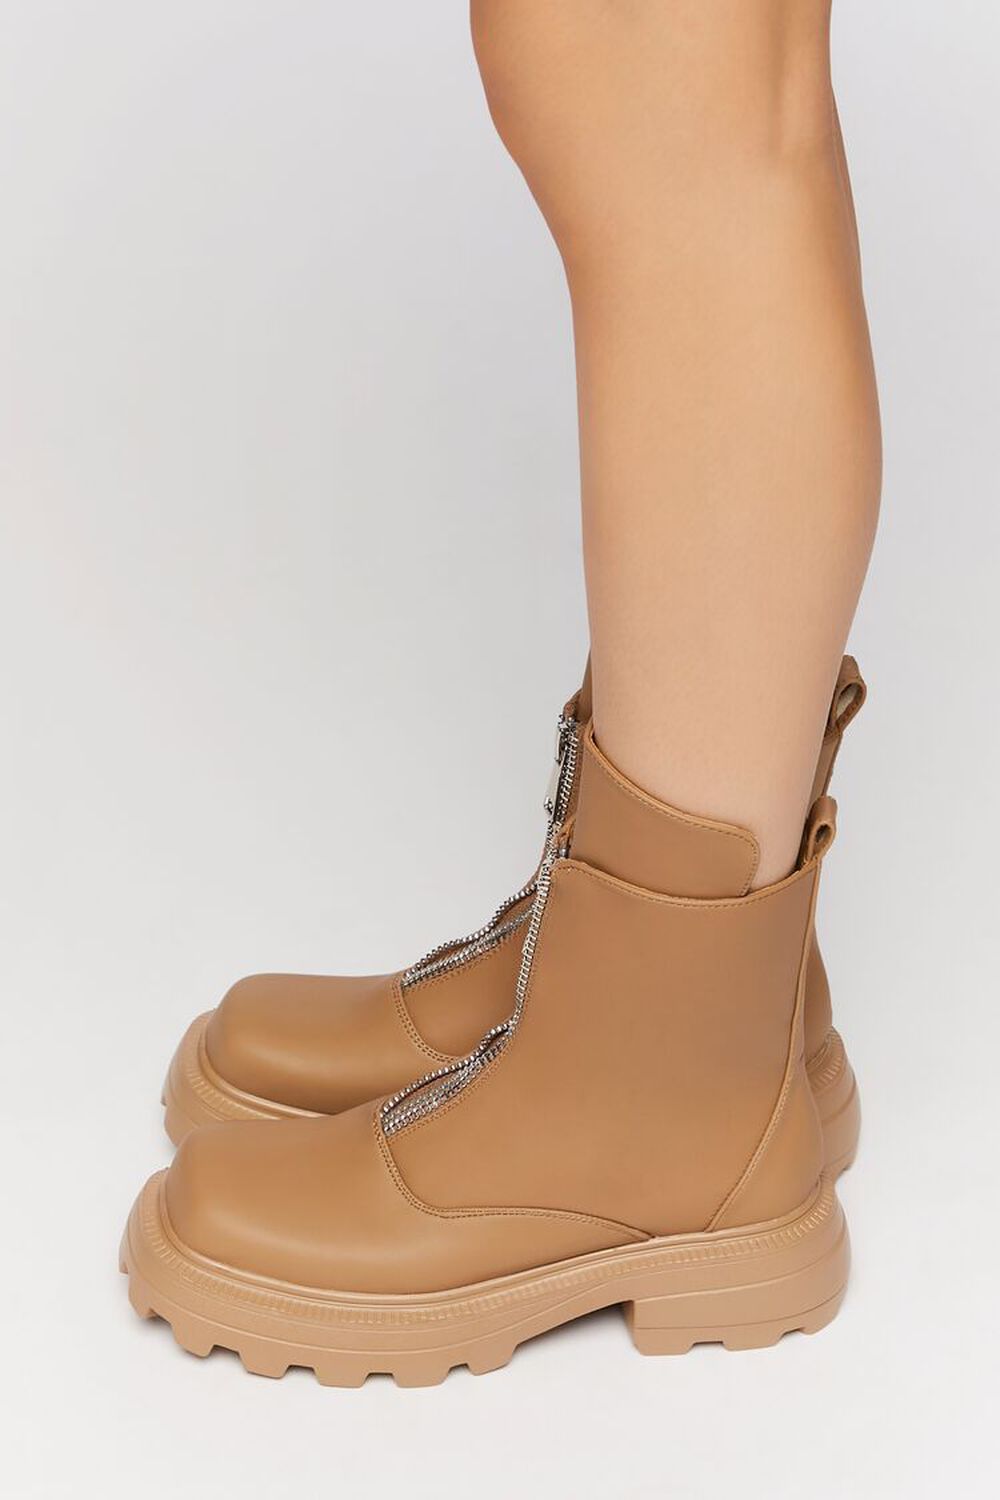 NUDE Zip-Front Faux Leather Booties, image 2